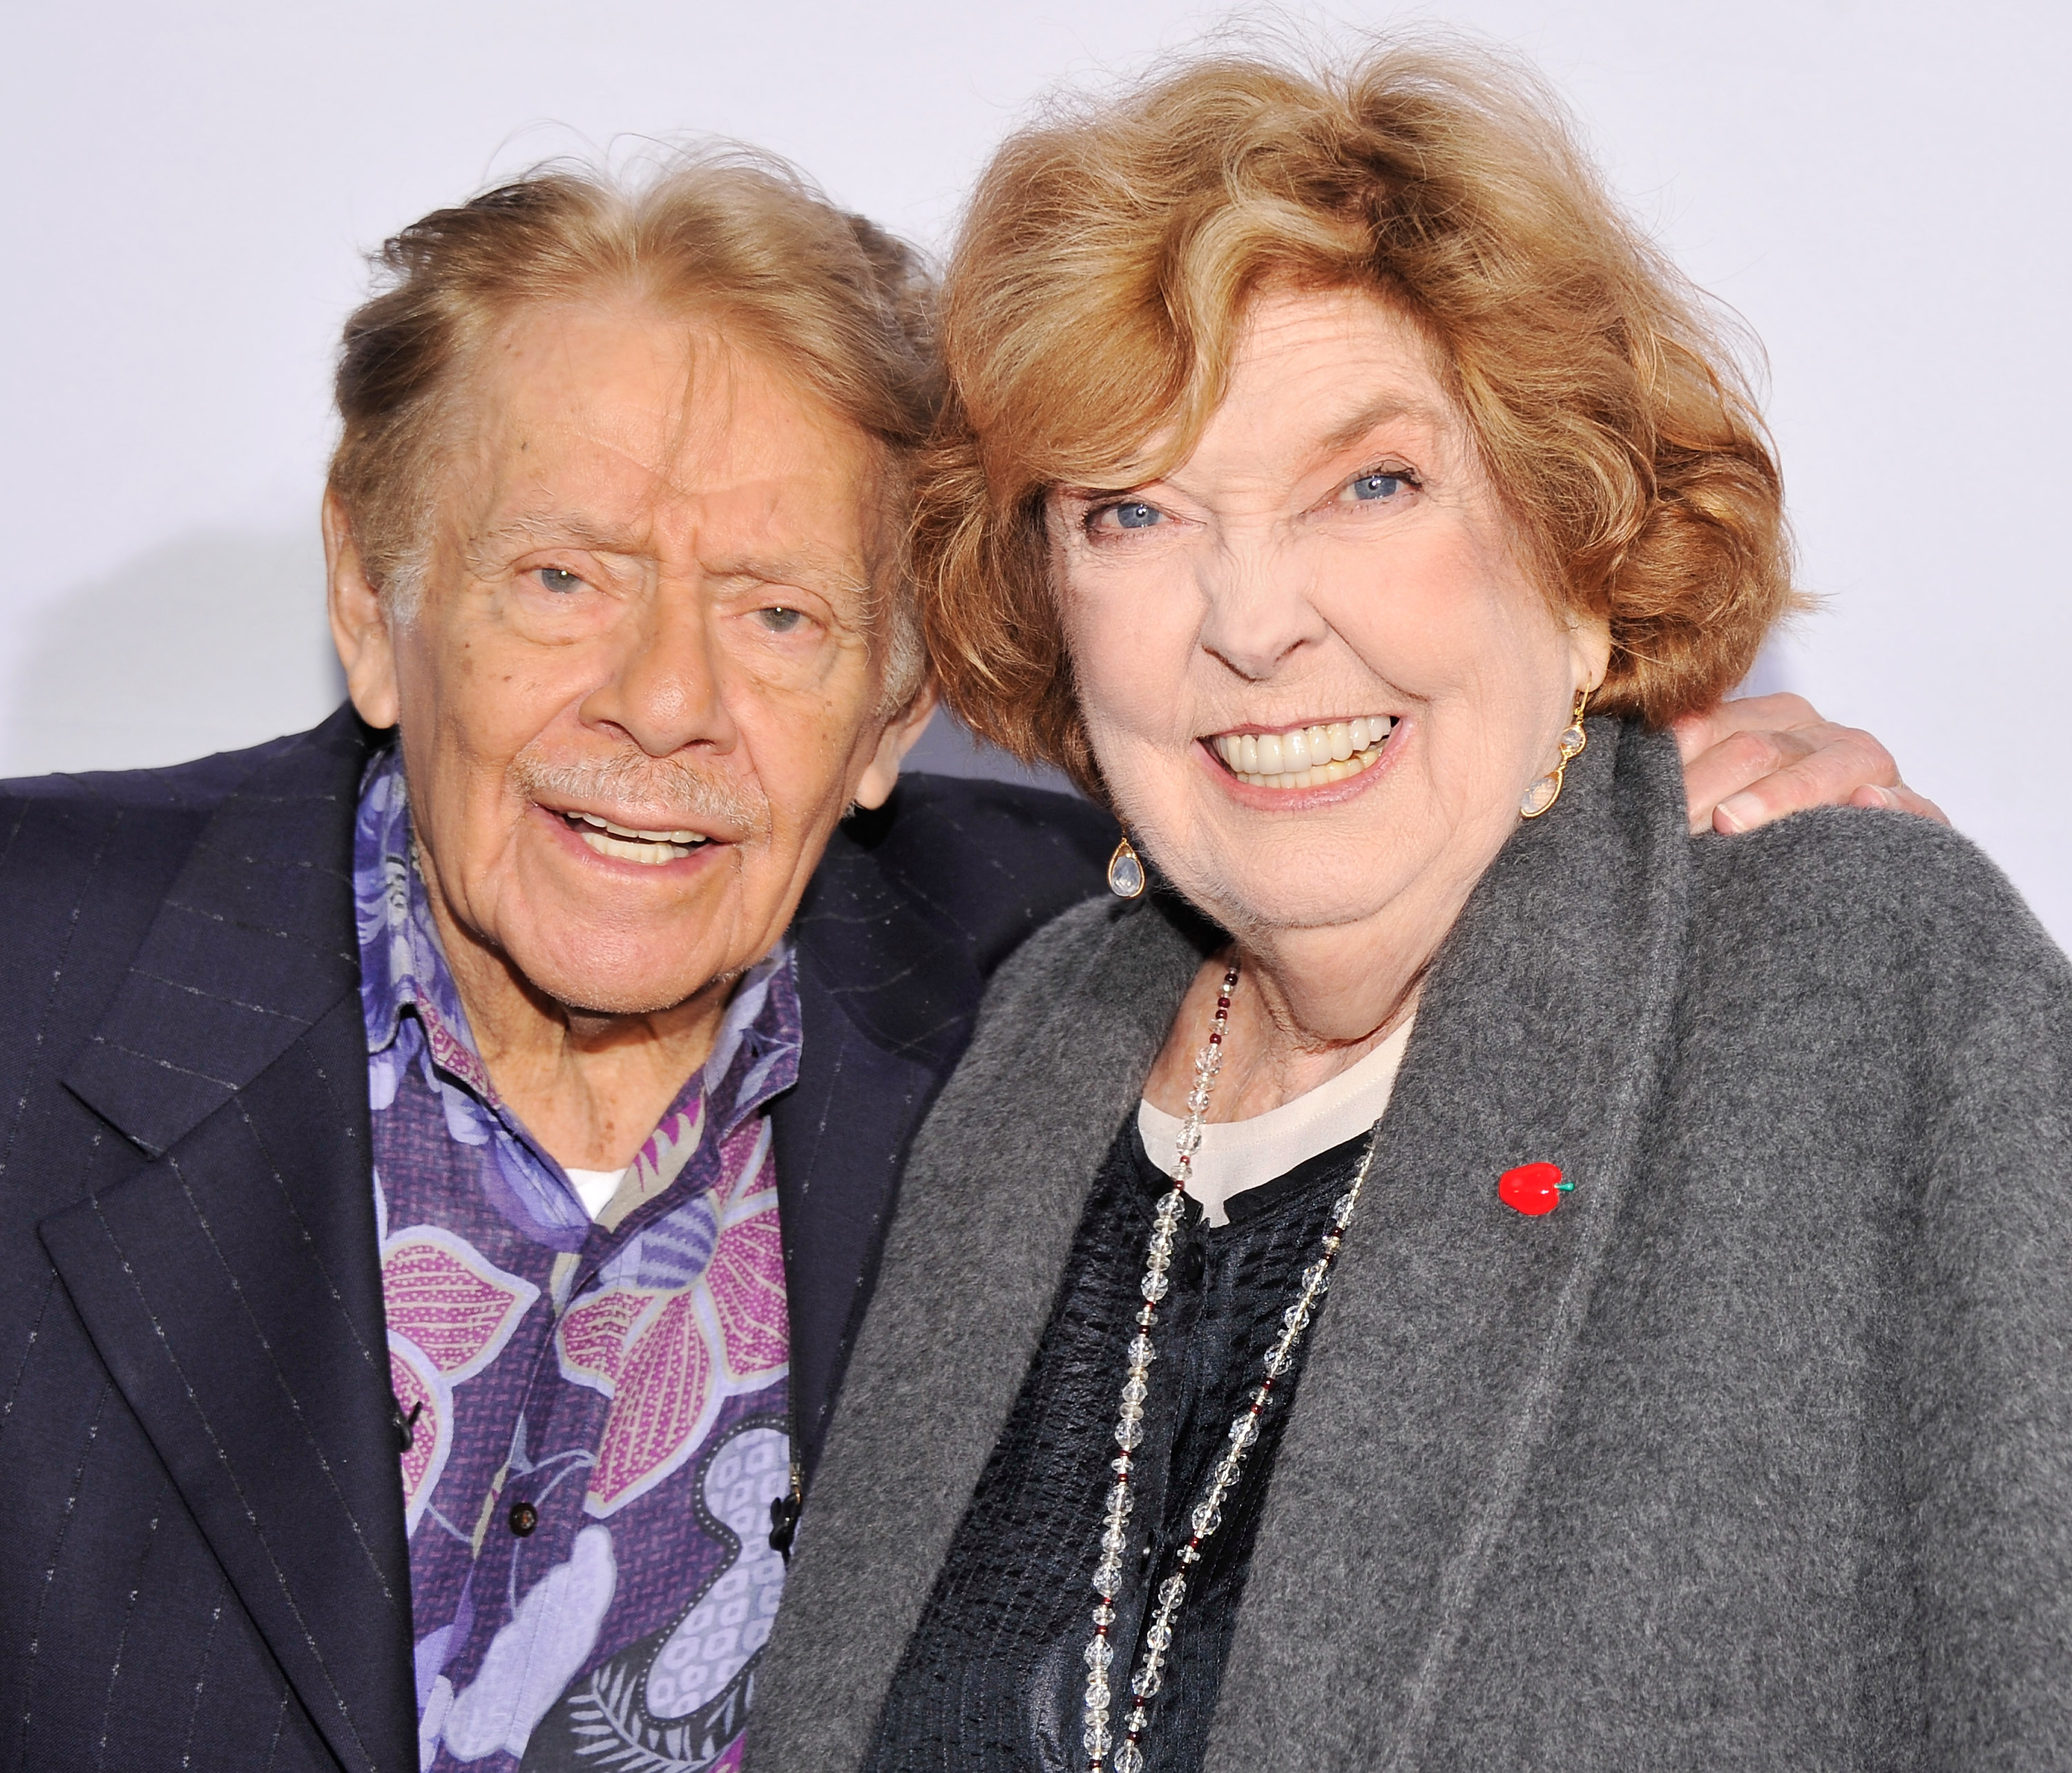 Jerry Stiller and Anne Meara at the Made In NY Awards in New York City on June 4, 2012. | Source: Getty Images